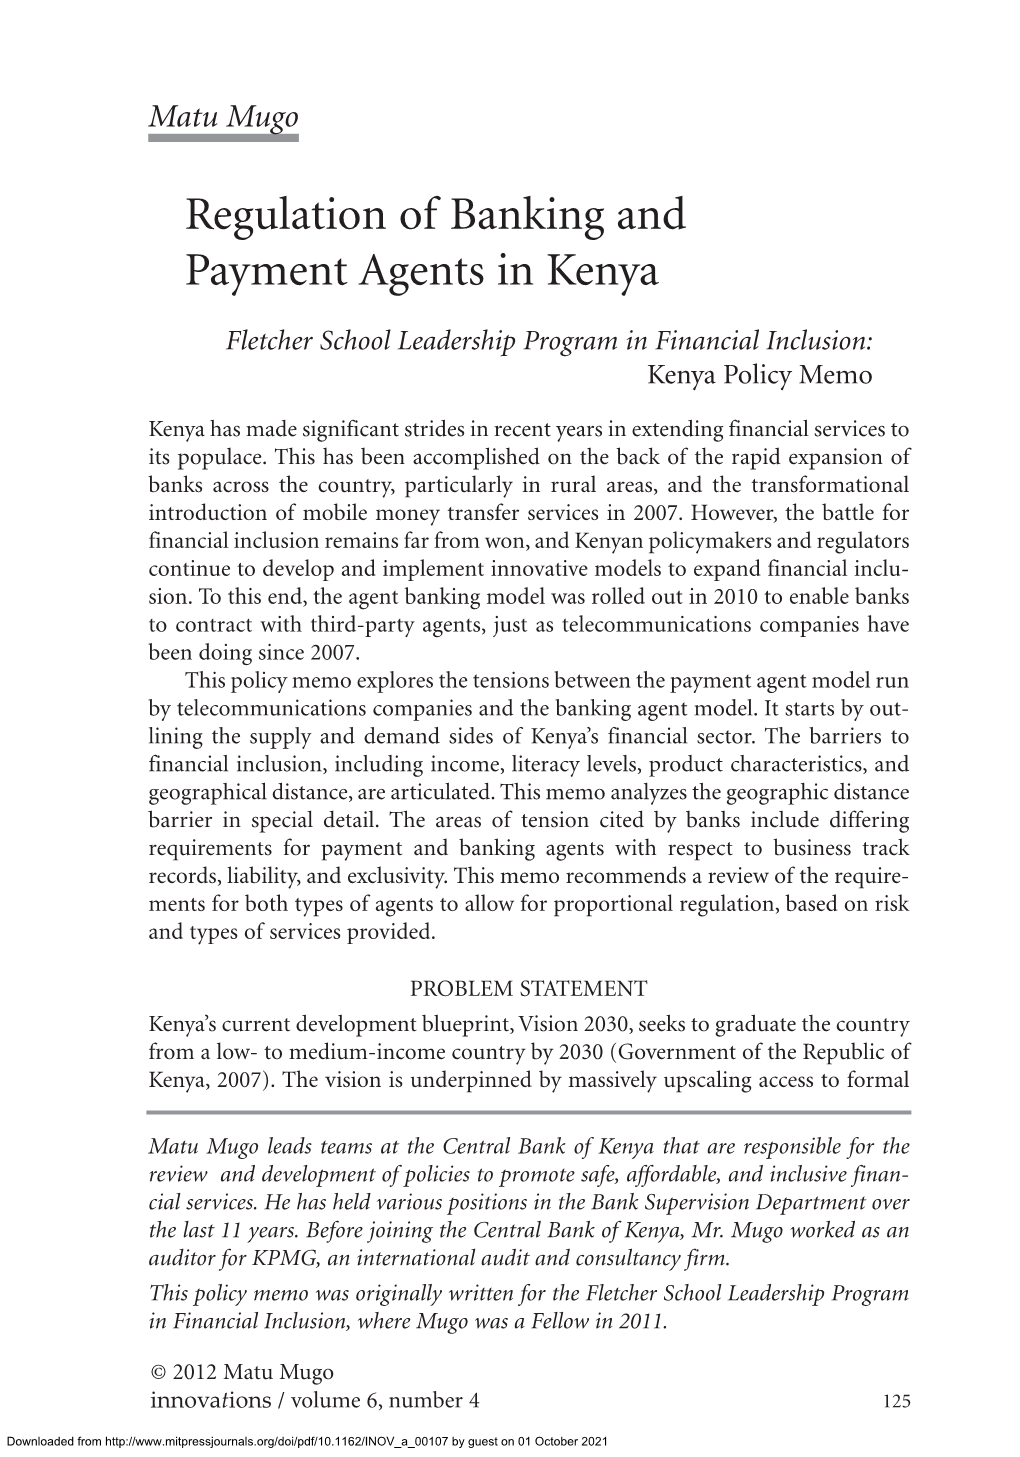 Regulation of Banking and Payment Agents in Kenya